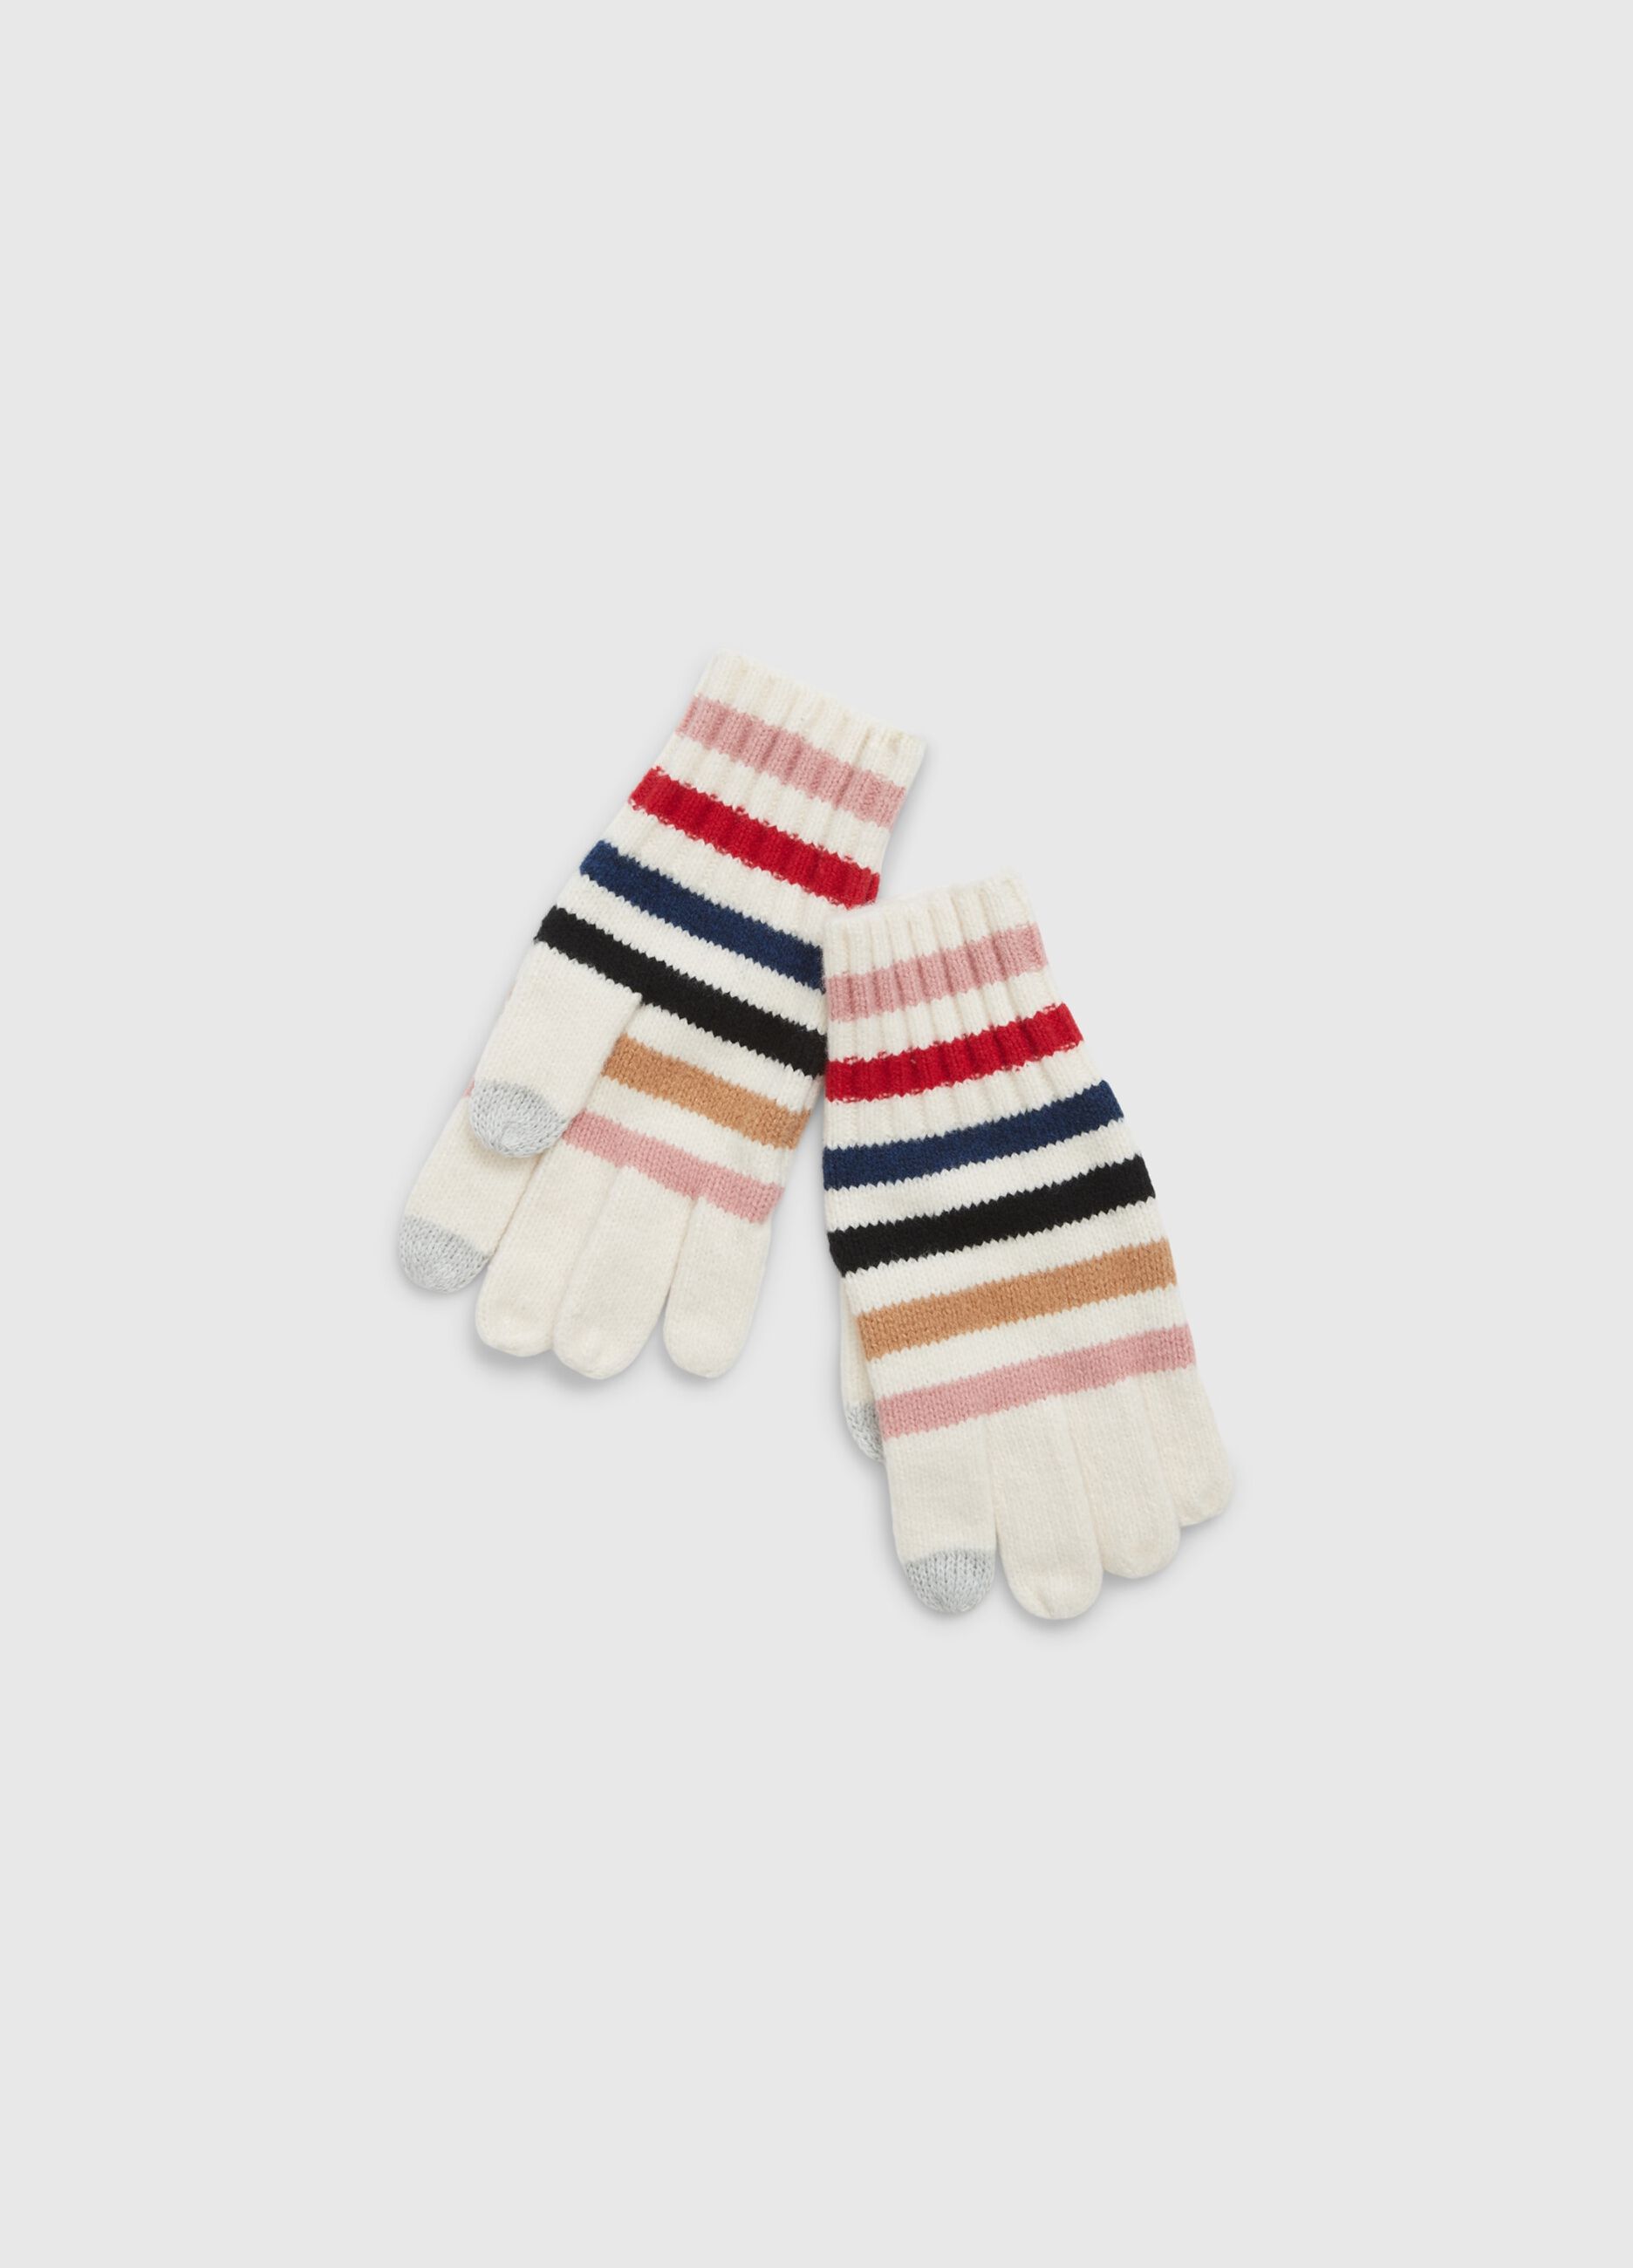 Touchscreen gloves with multicoloured stripes